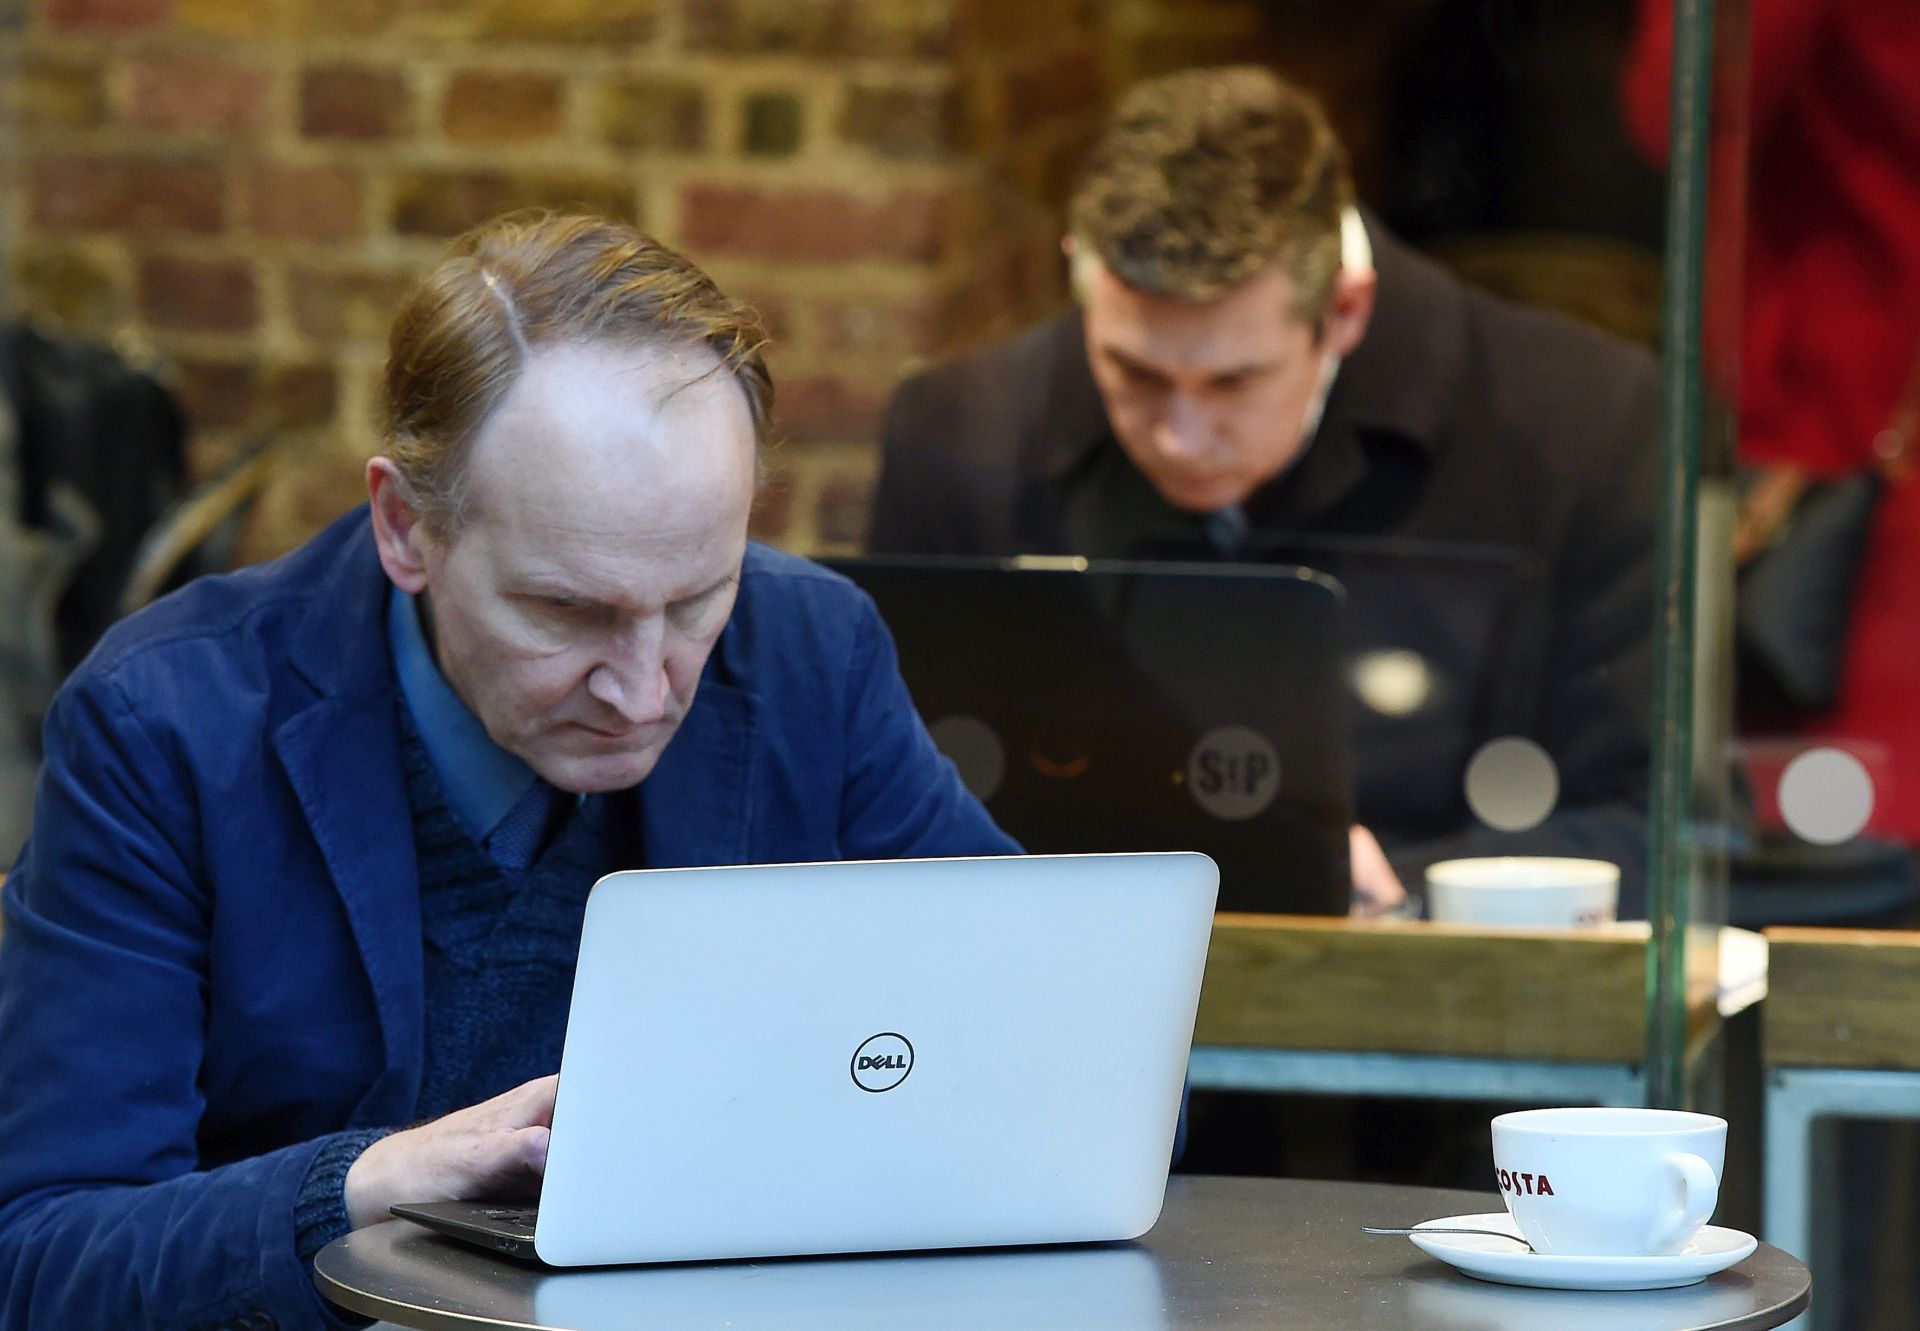 epa05101507 Customers use the internet at a coffee shop in London, Britain, 14 January 2016. Coffee shops with public wifi networks may be obliged to store internet data for up to a year under new snoopers charter laws, the UK government has said.  EPA/ANDY RAIN